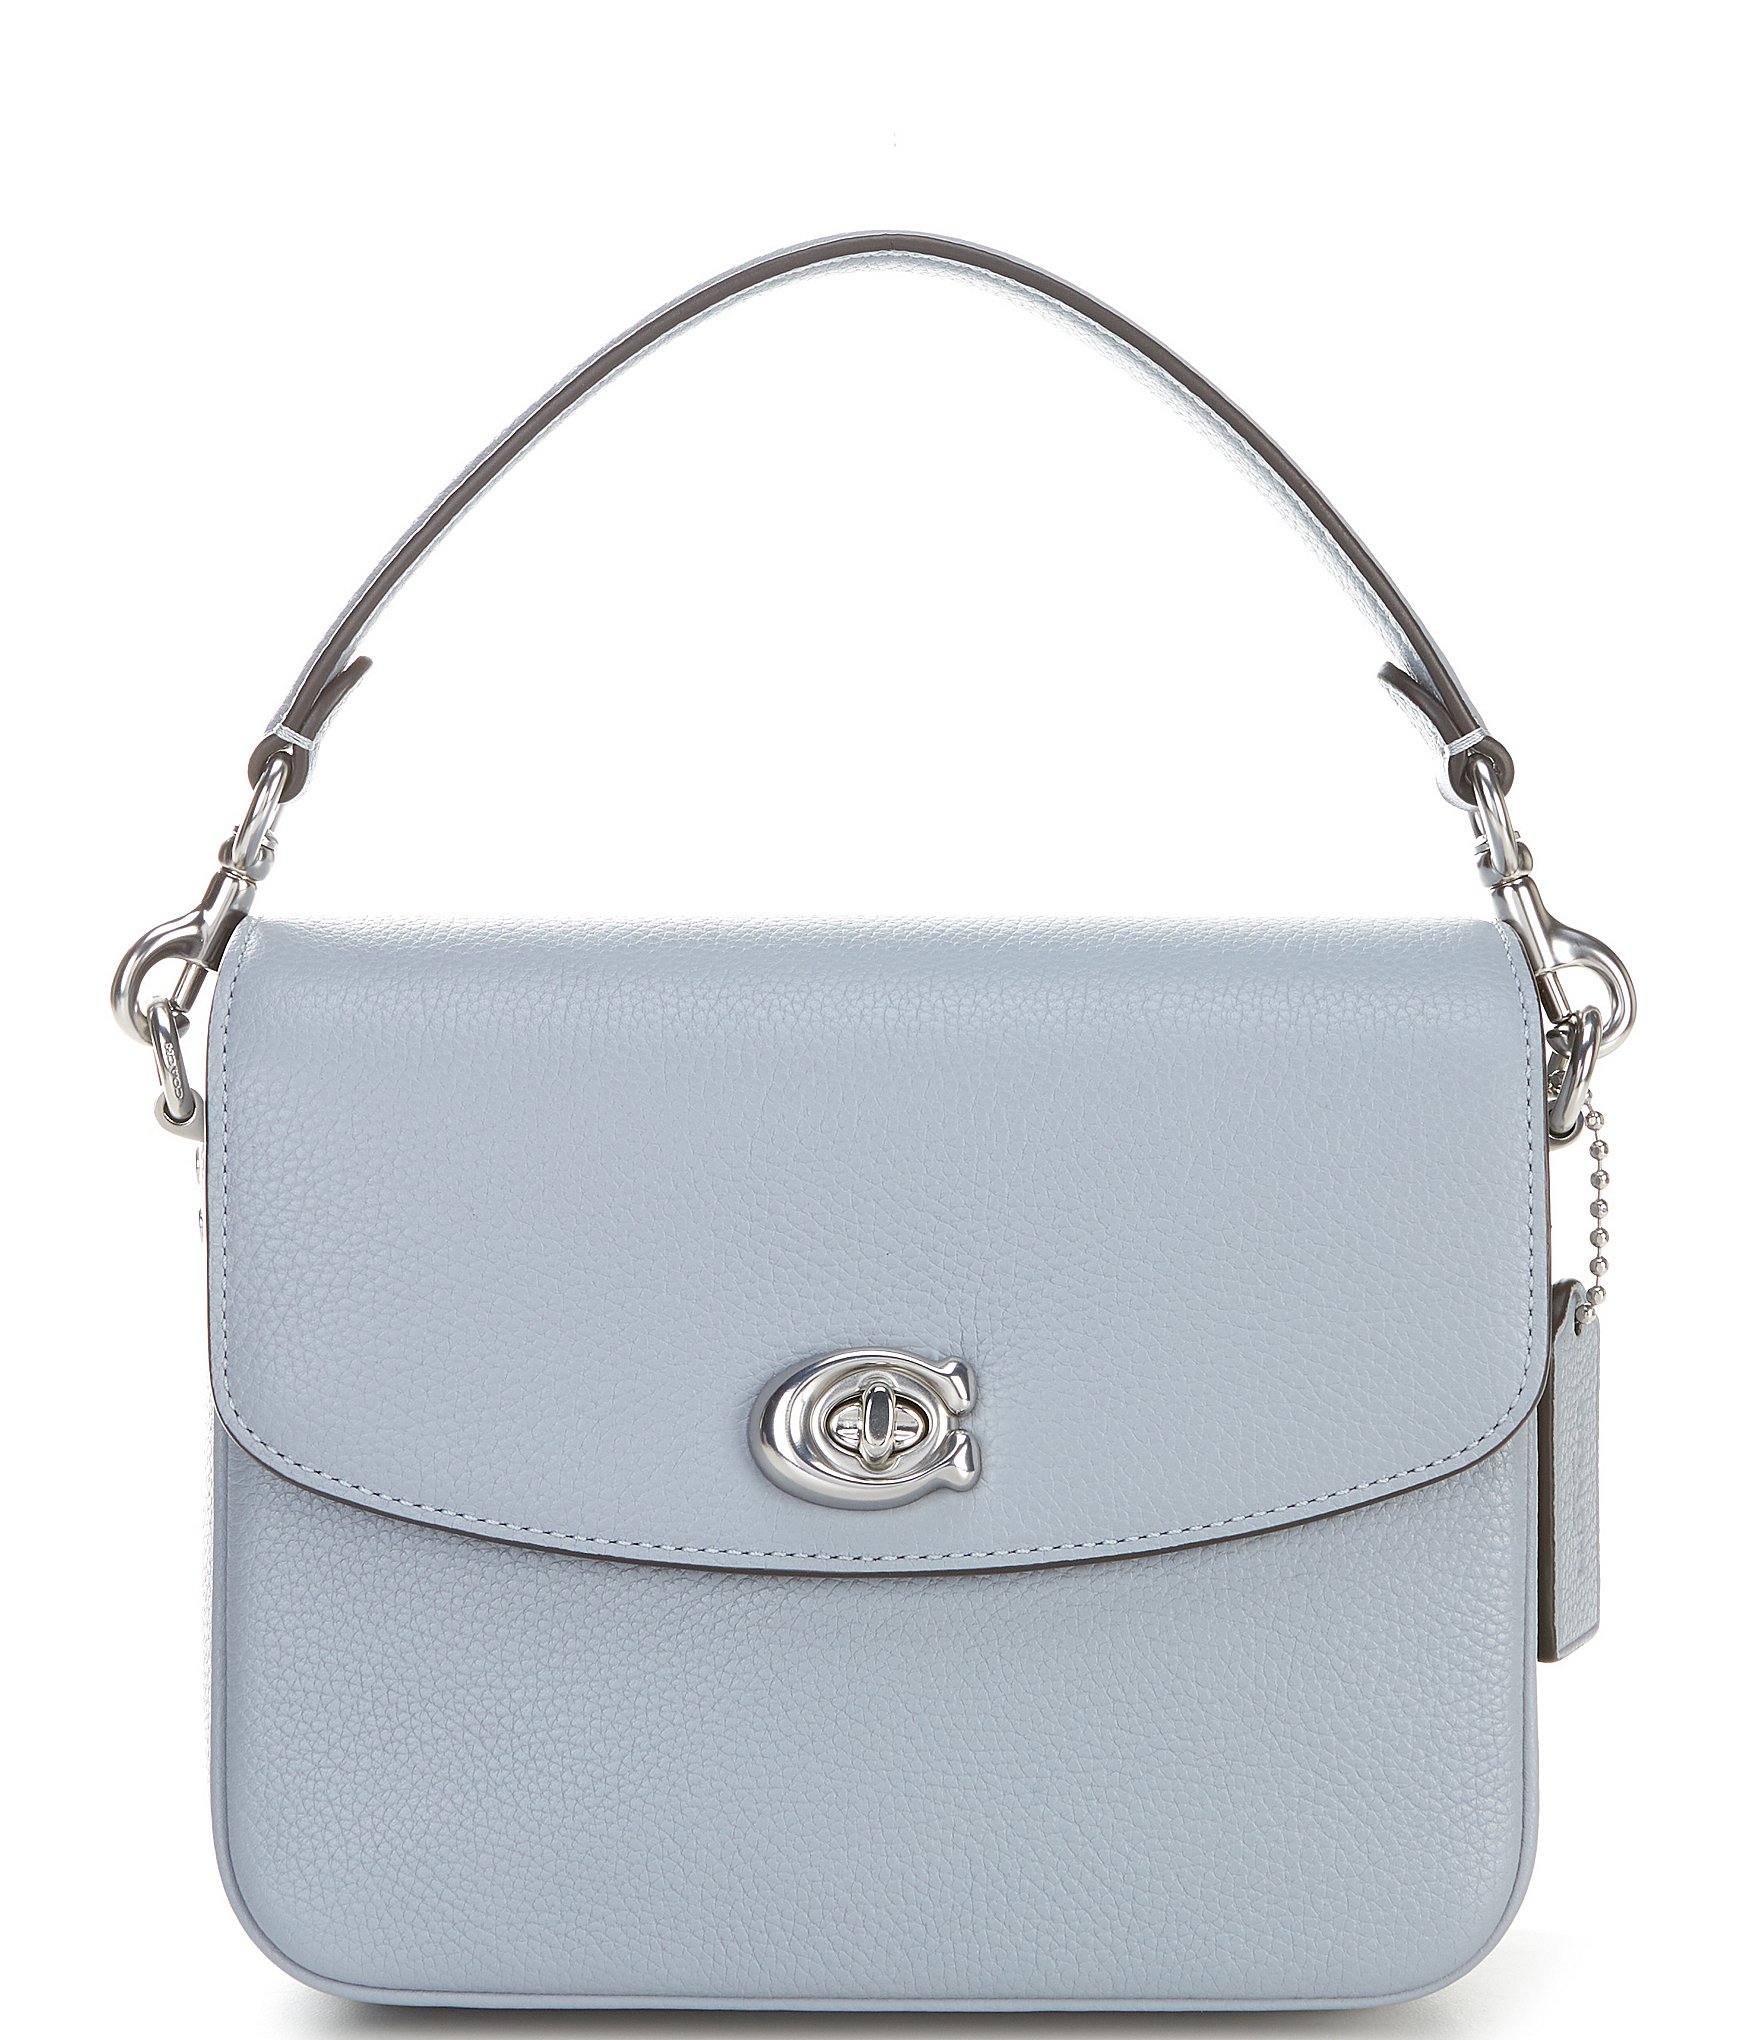 COACH Cassie Crossbody In Polished Pebble Leather - Macy's  Crossbody bag  outfit, Stylish backpacks, Coach crossbody bag